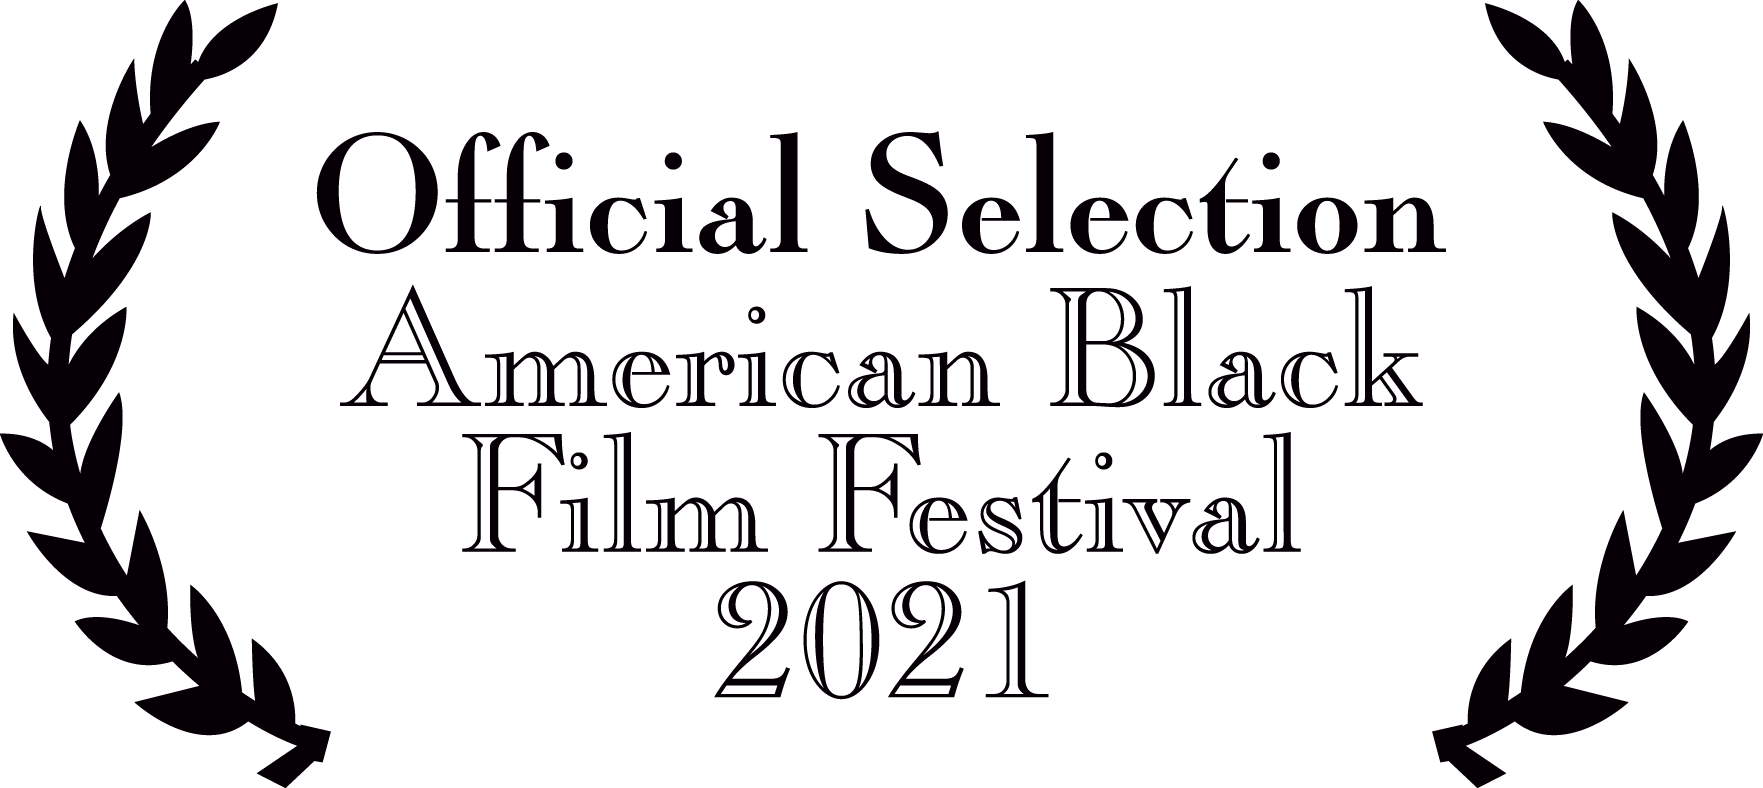 Official-Selection-ABFF-2021-Wreath-black.png